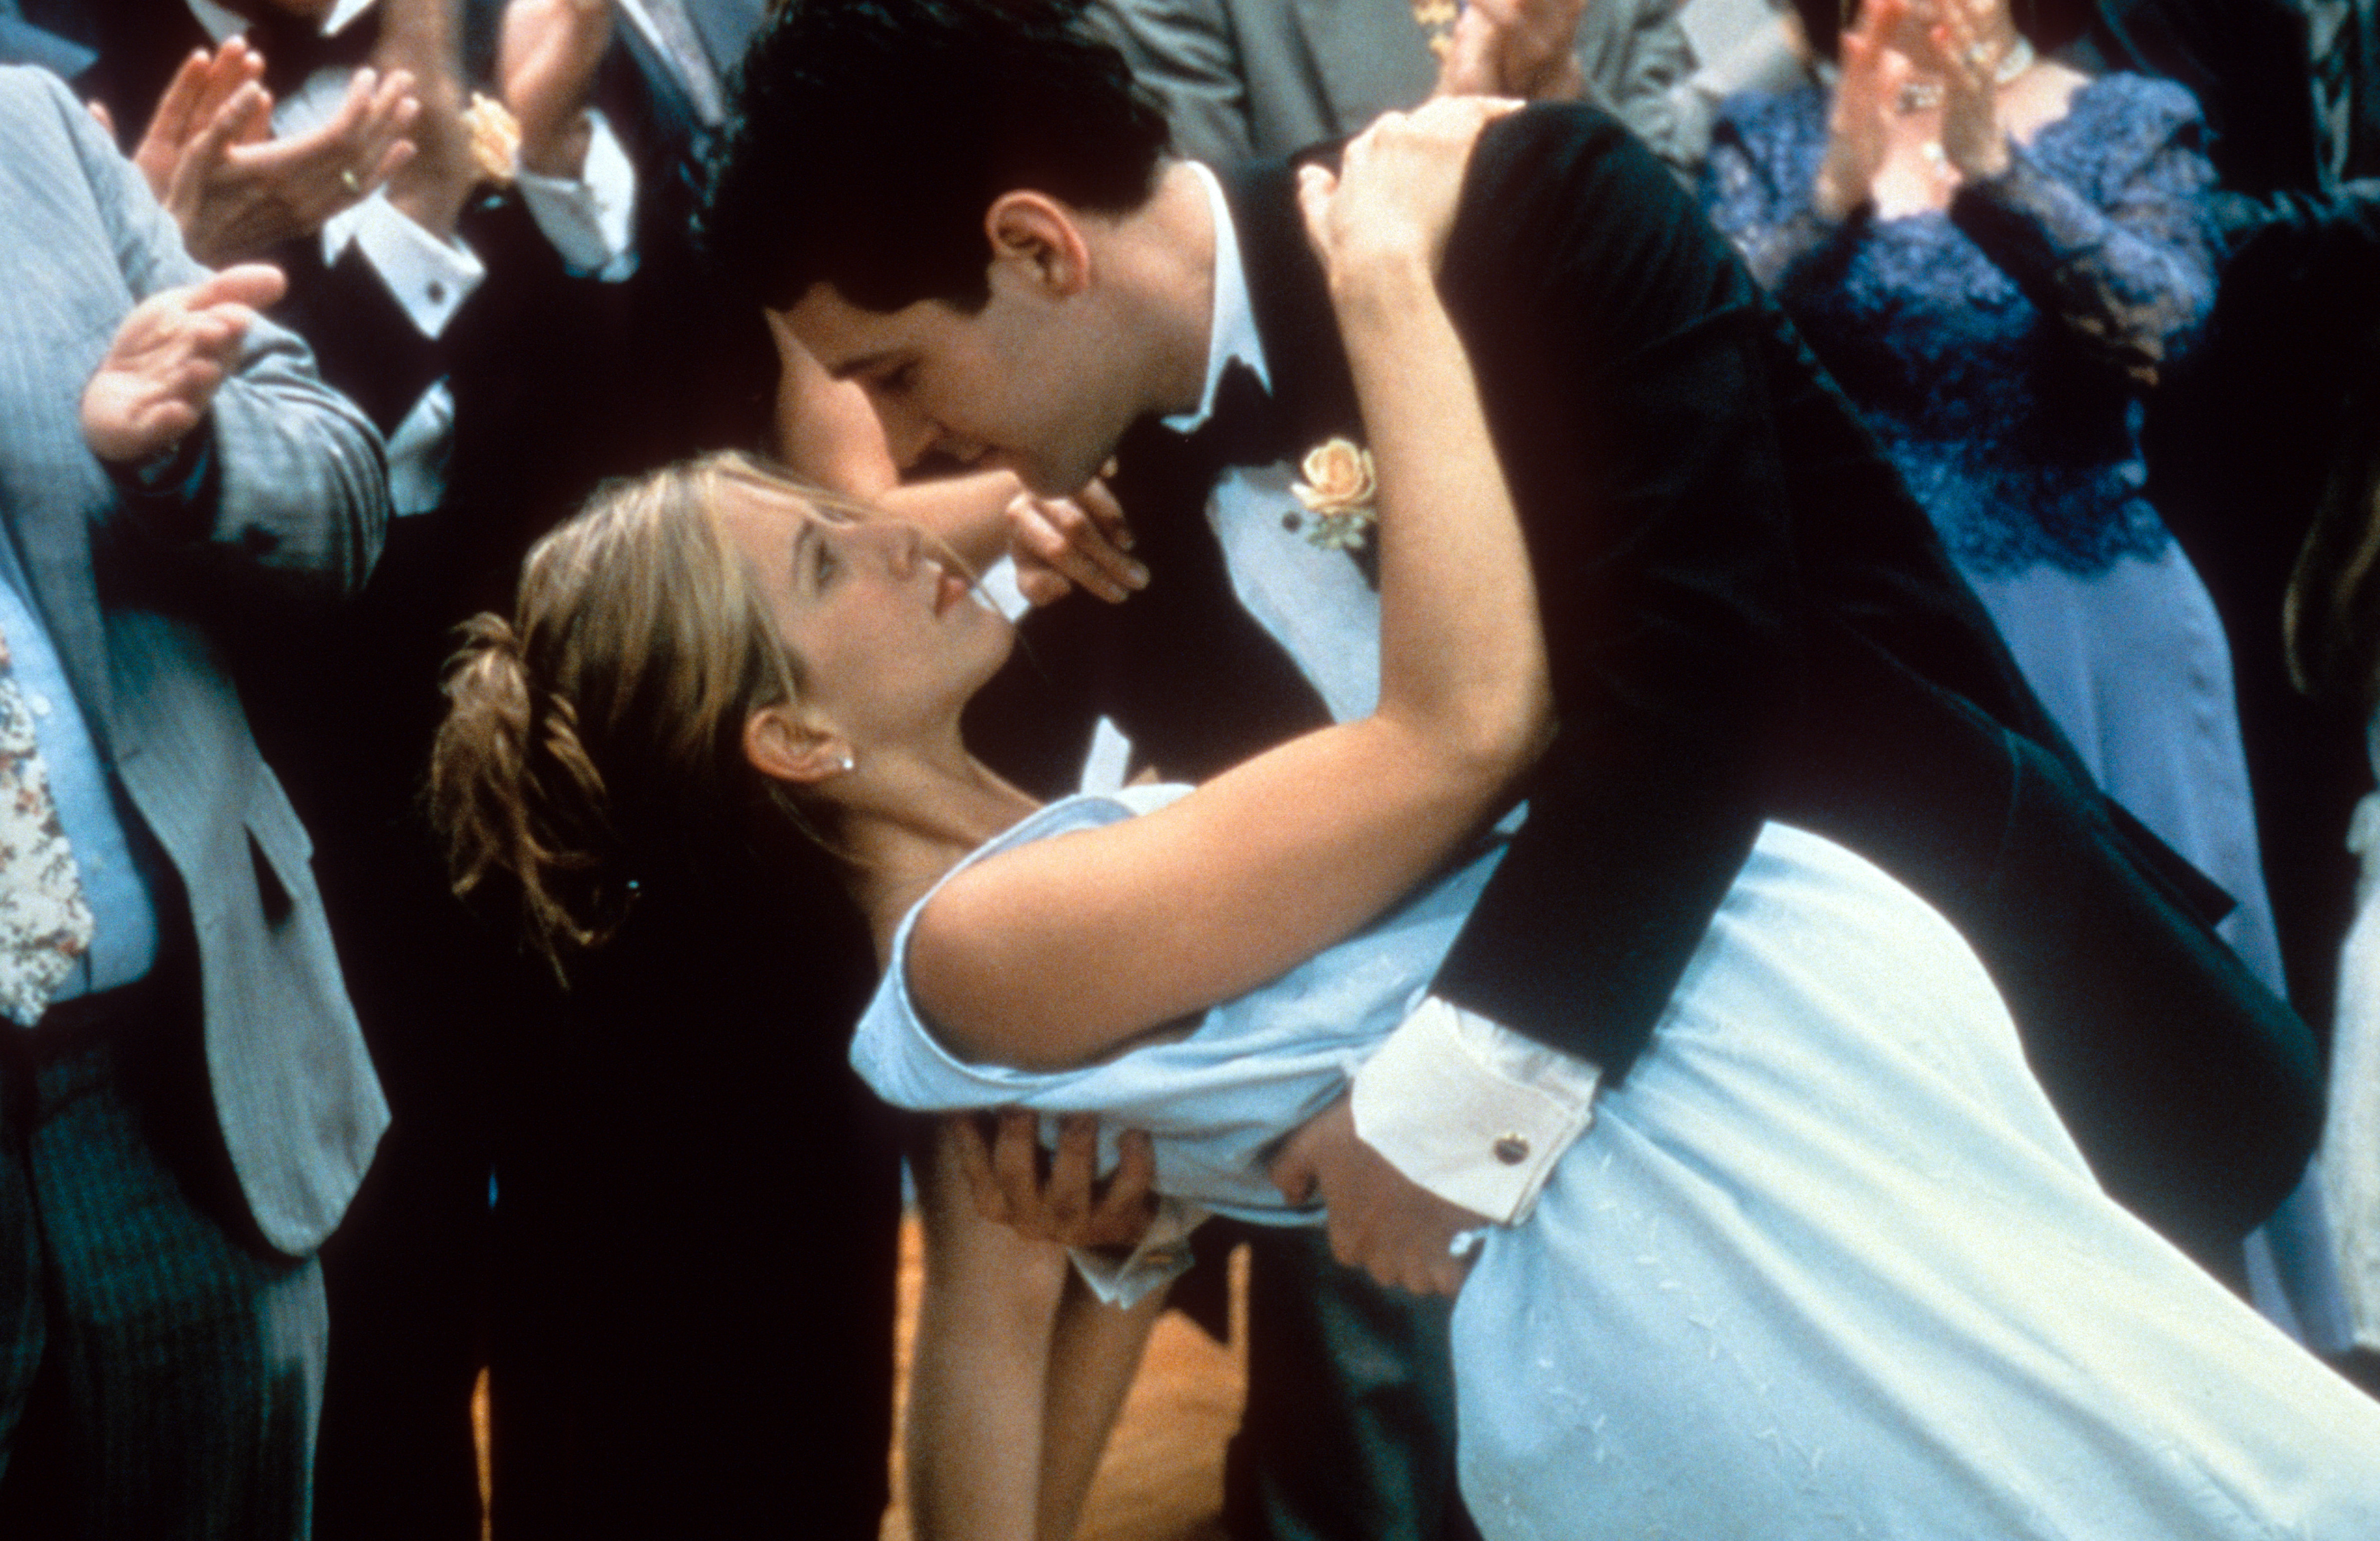 Jennifer Aniston and Paul Rudd on the set of "The Object Of My Affection," in 1998. | Source: Getty Images